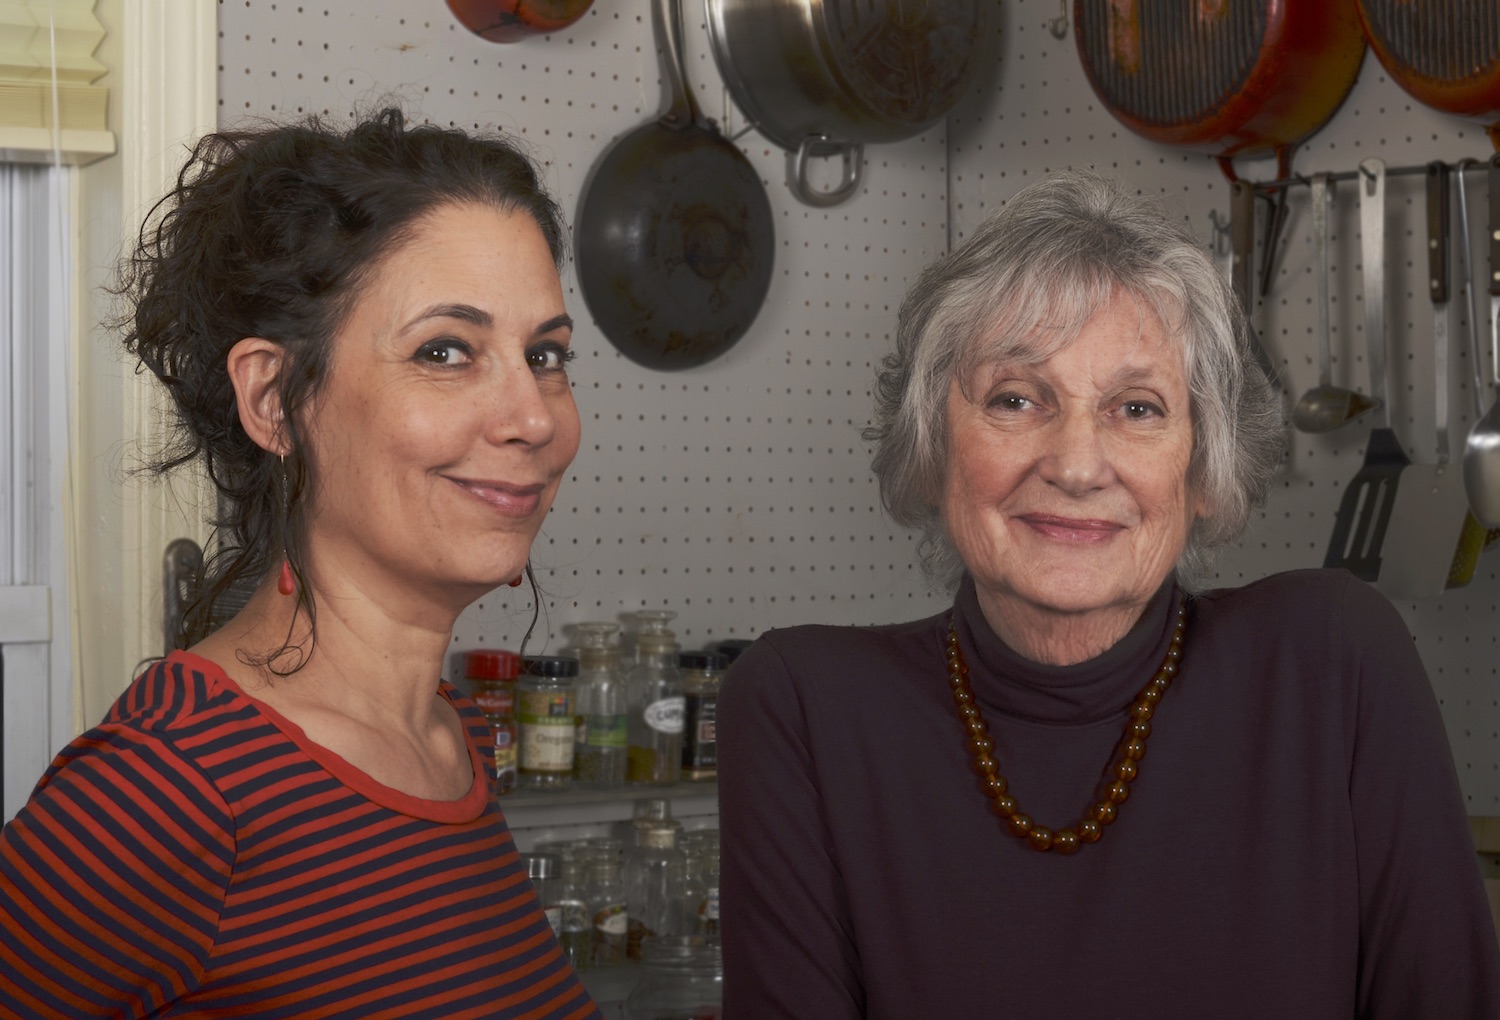 Sonya Gropman (L) and her mother Gabrielle “Gaby” Rossmer Gropman. Photo by James Hull.